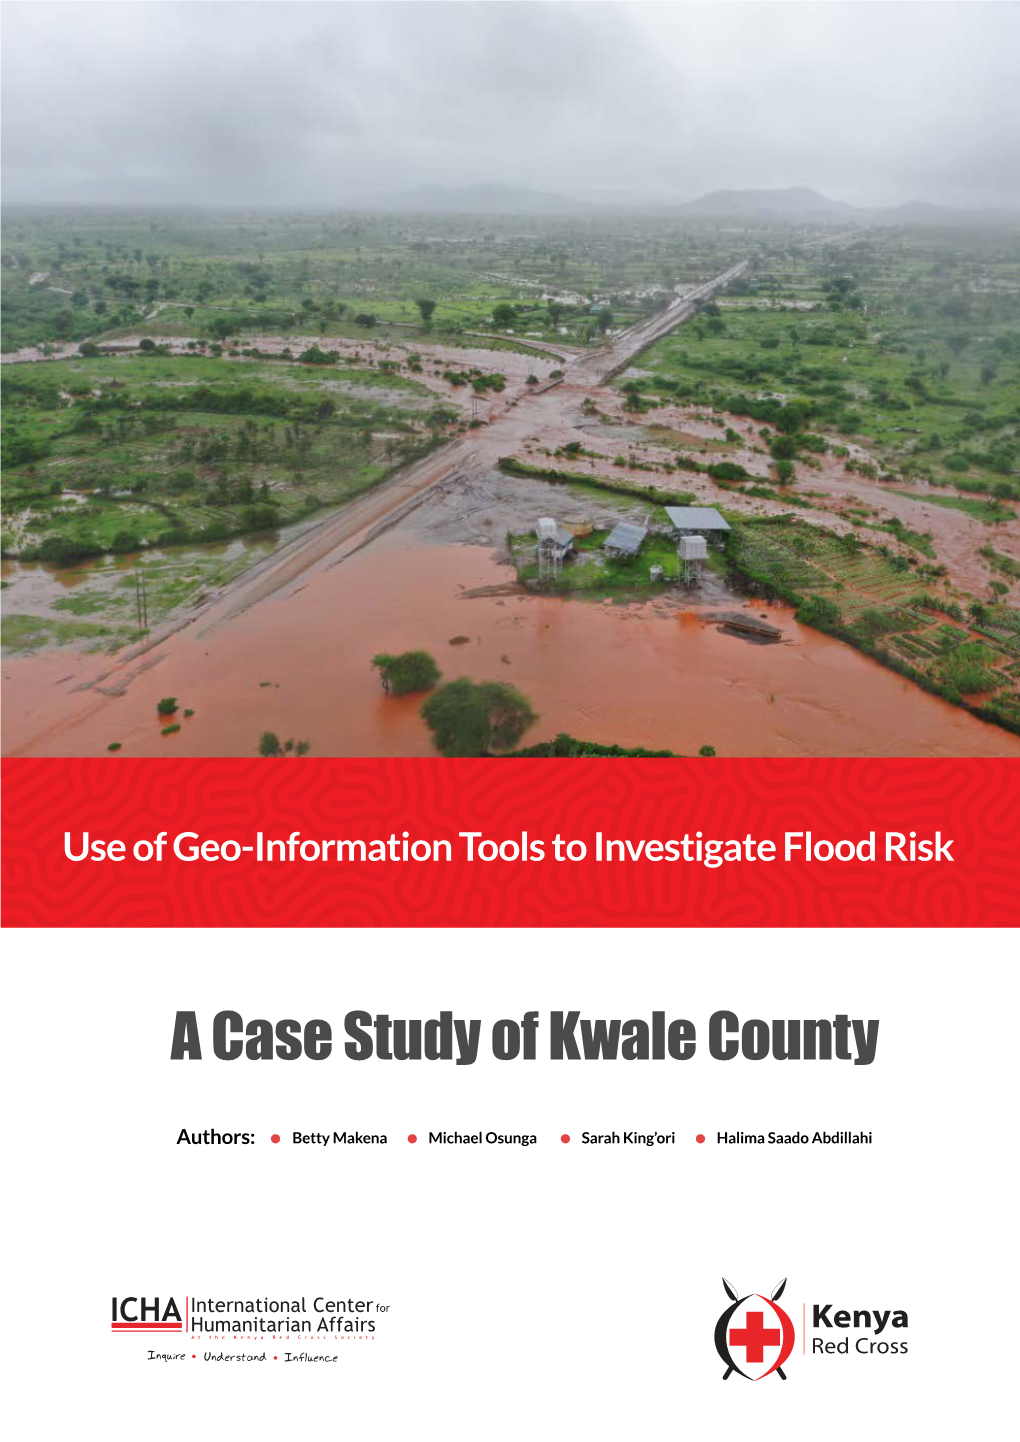 A Case Study of Kwale County